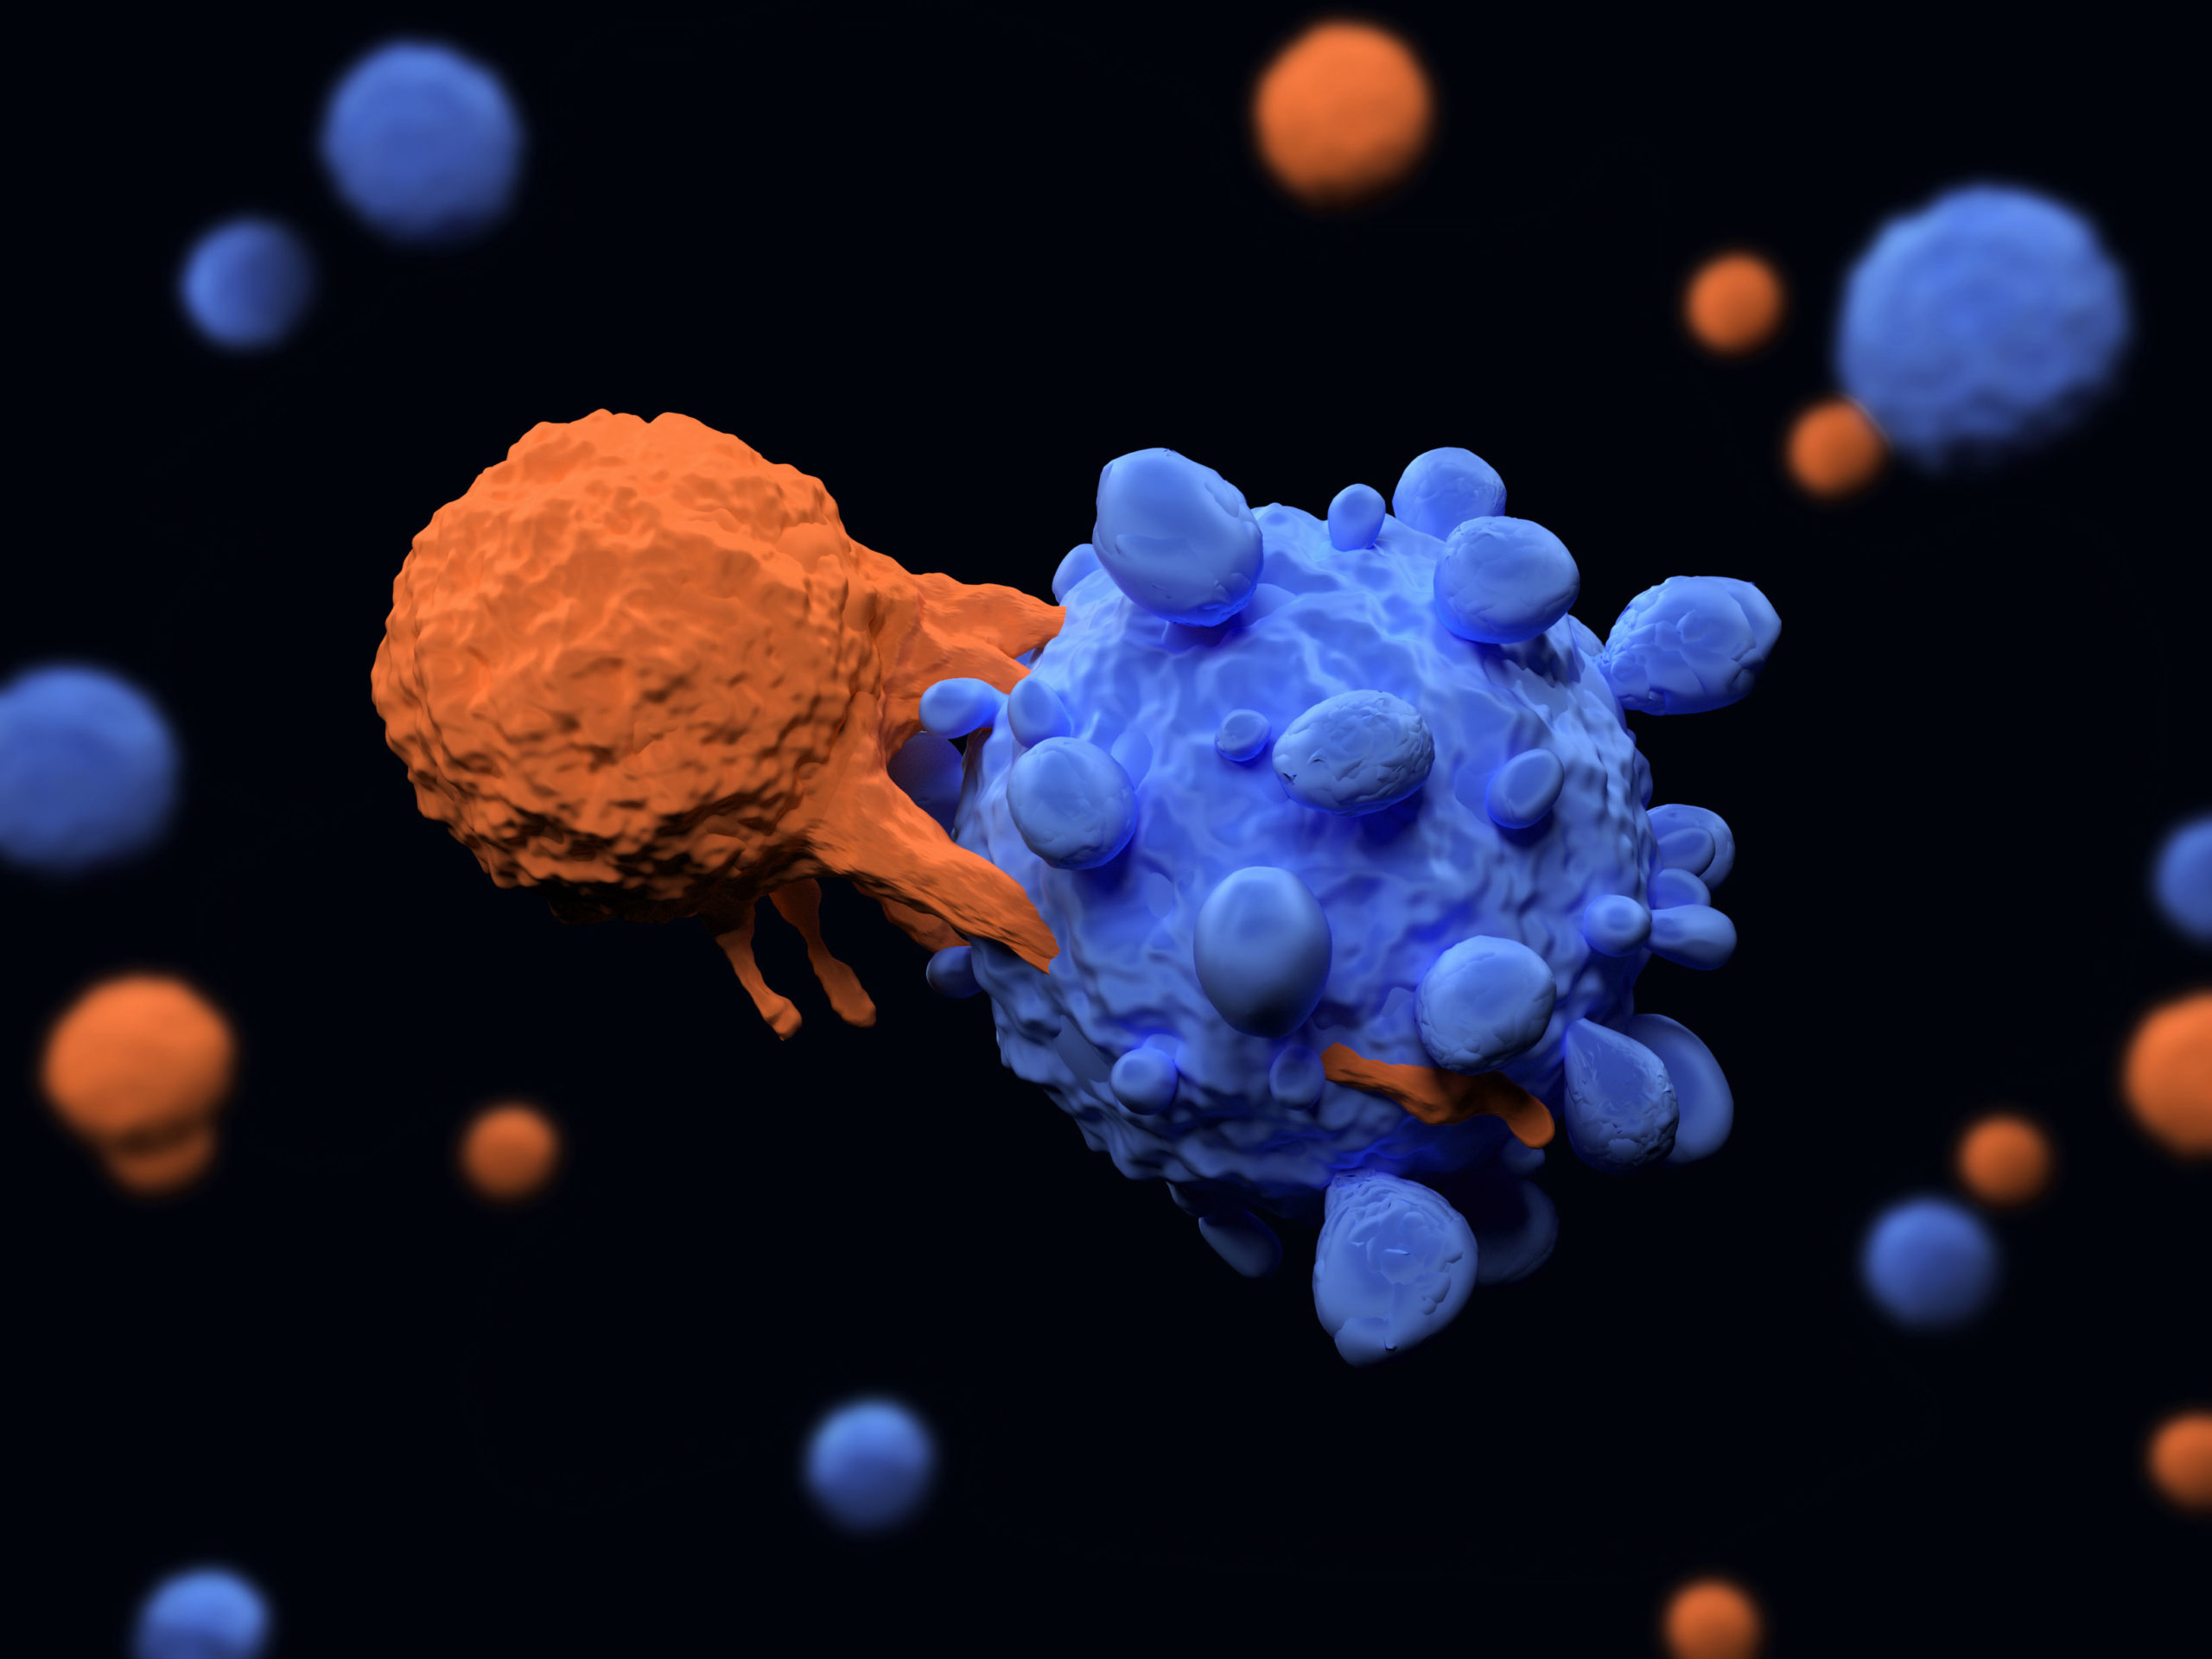 immune system T cell killing a cancer cell